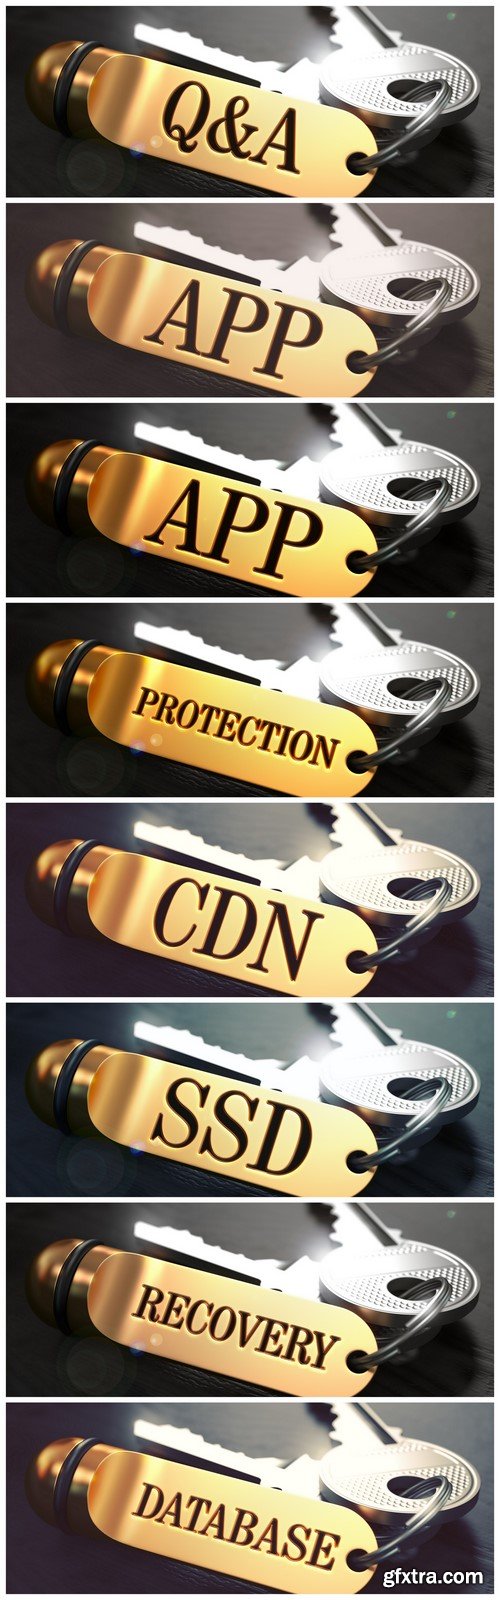 A bunch of keys with text in gold keychain 8X JPEG